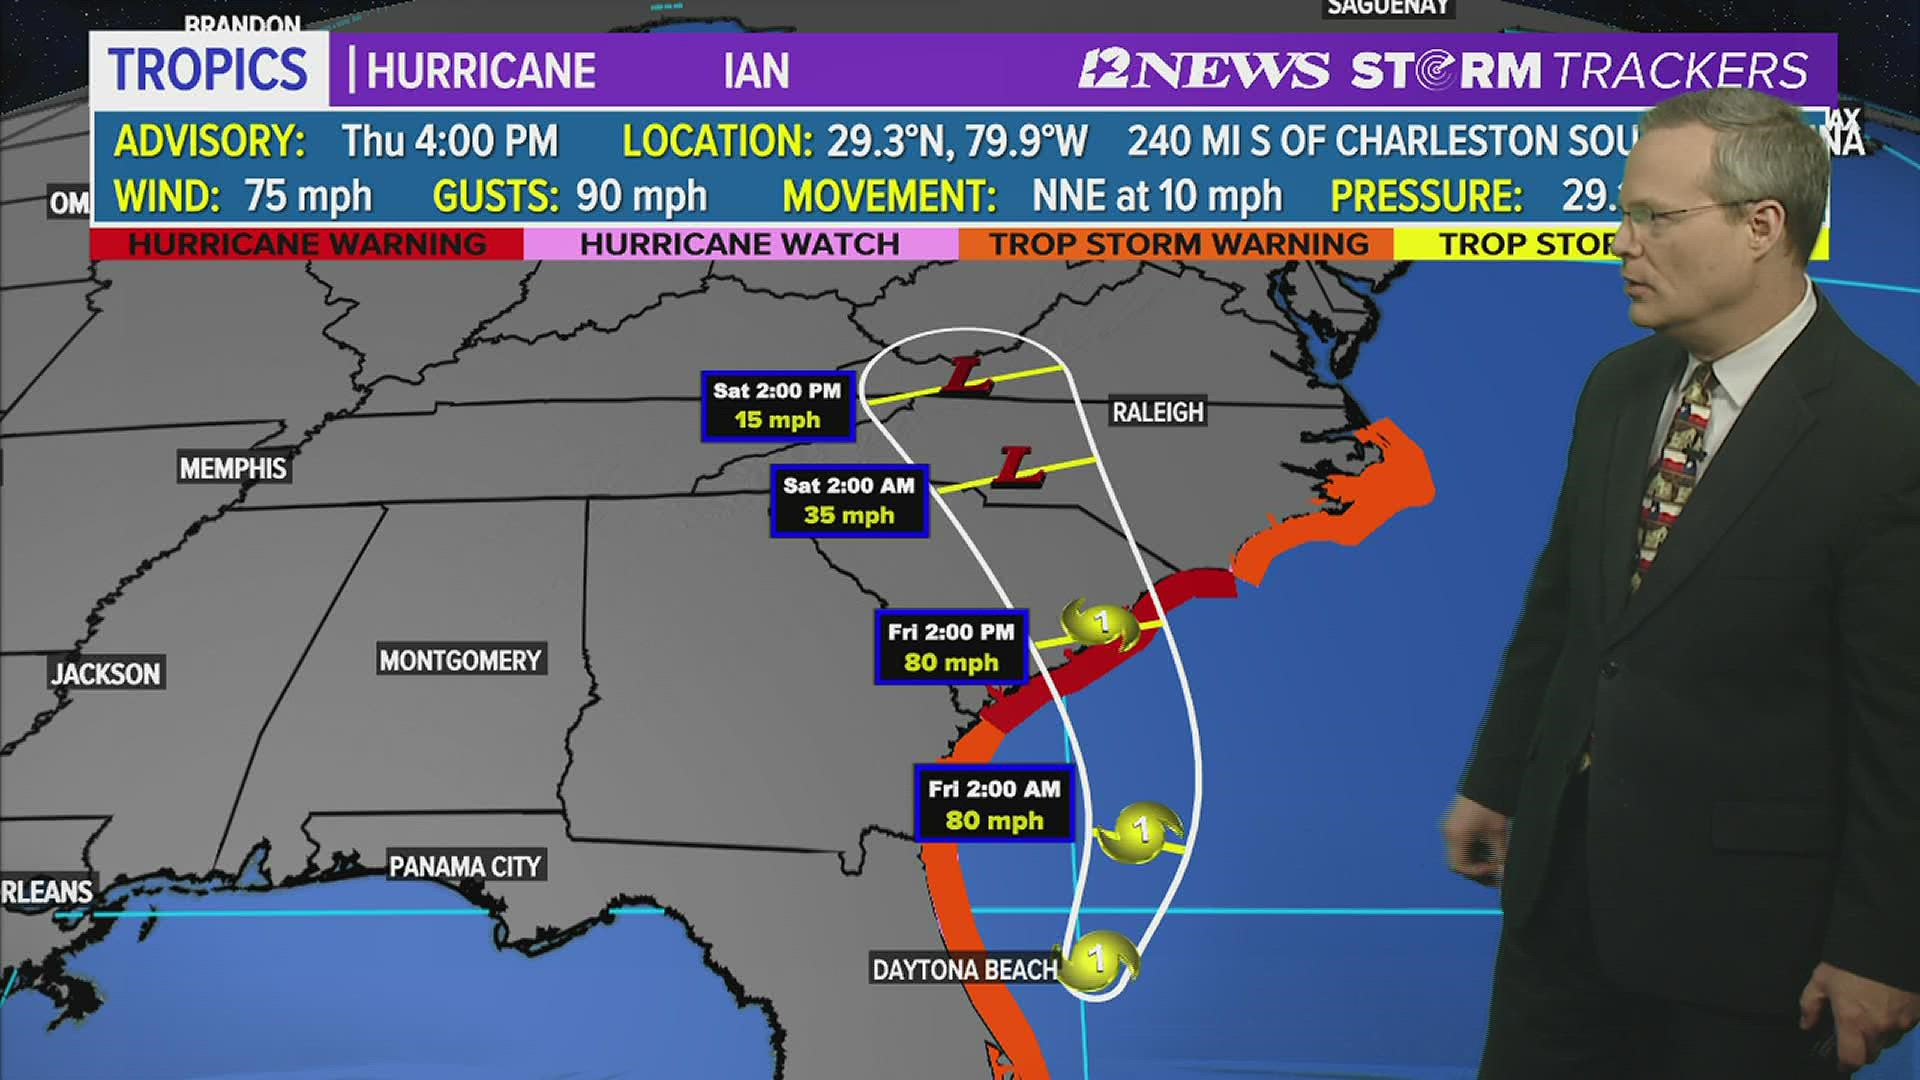 Strong winds, heavy rain continue for northeast Florida while South Carolina braces for impact.